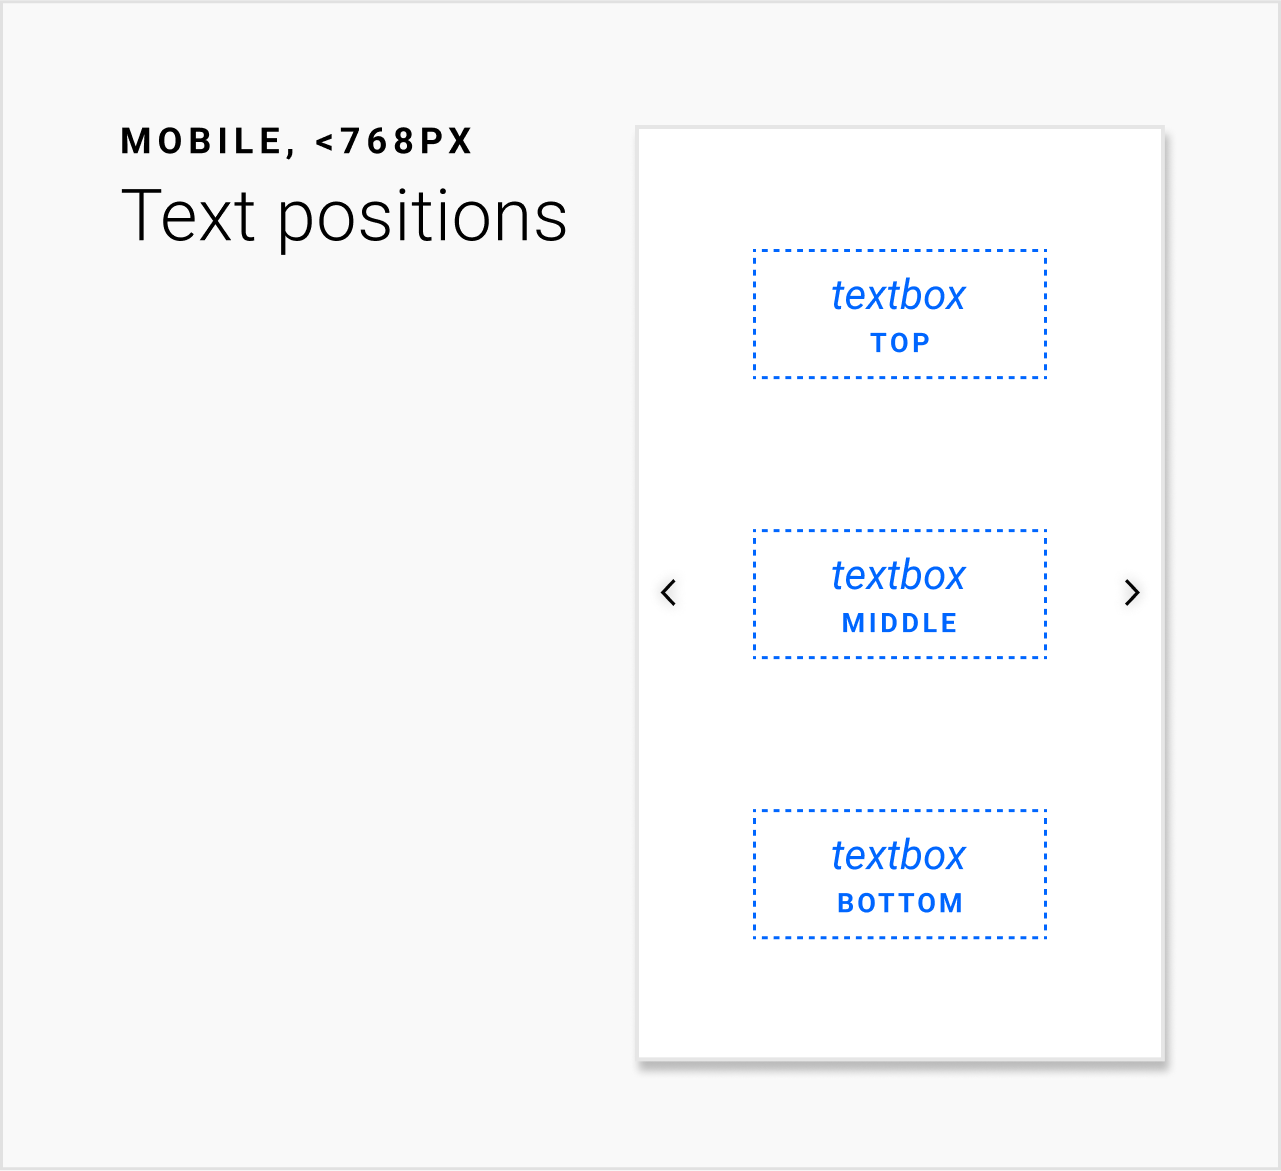 For screen widths of 768px or less, for a given page, designers could select between three textbox positions.